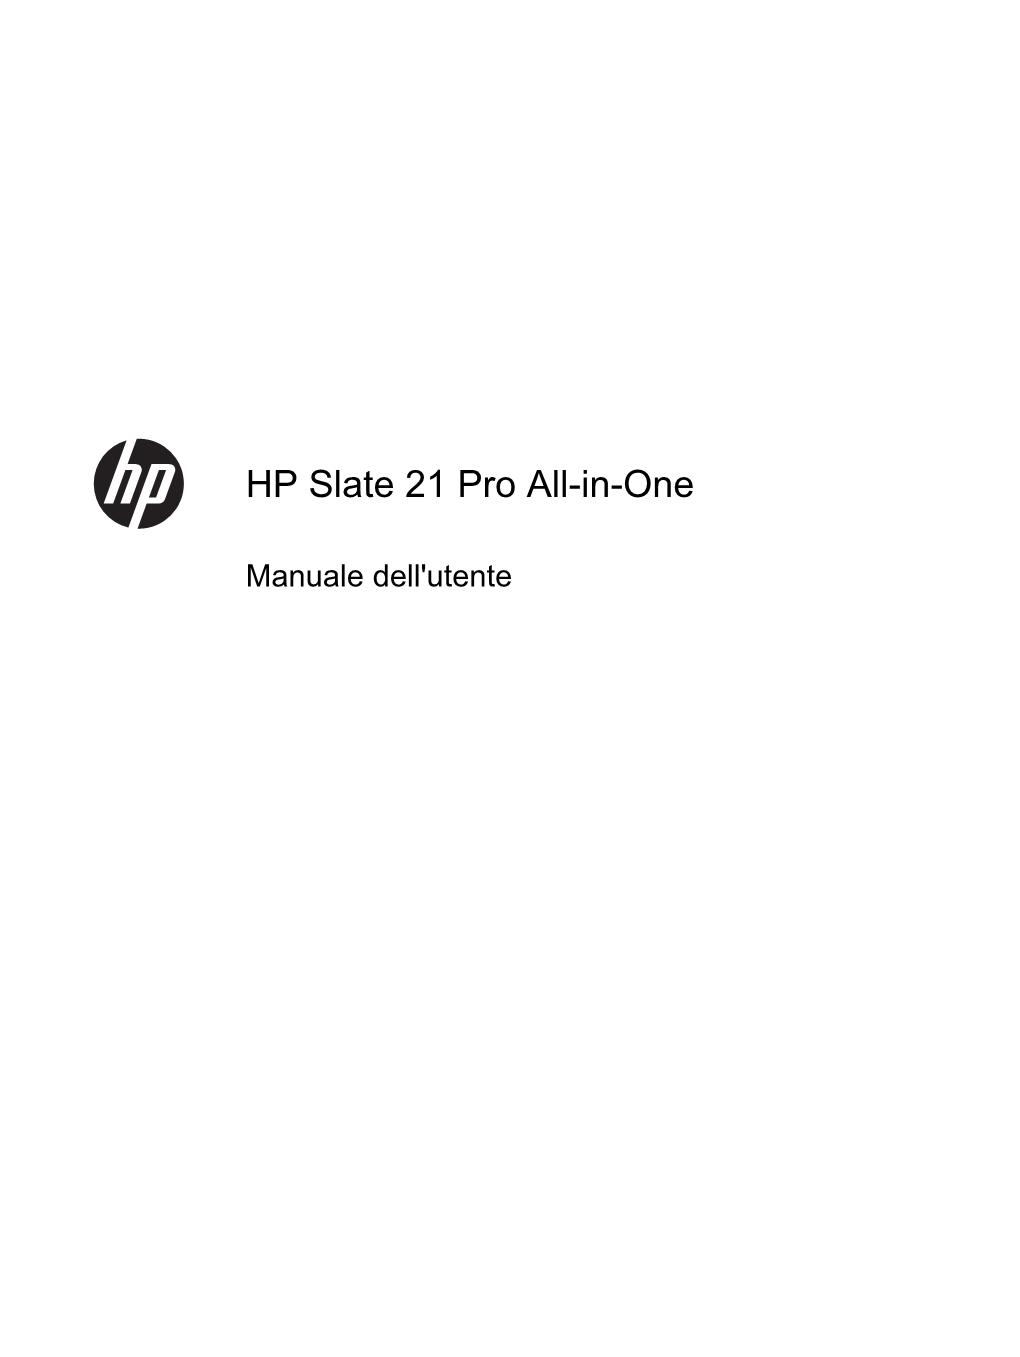 HP Slate 21 Pro All-In-One